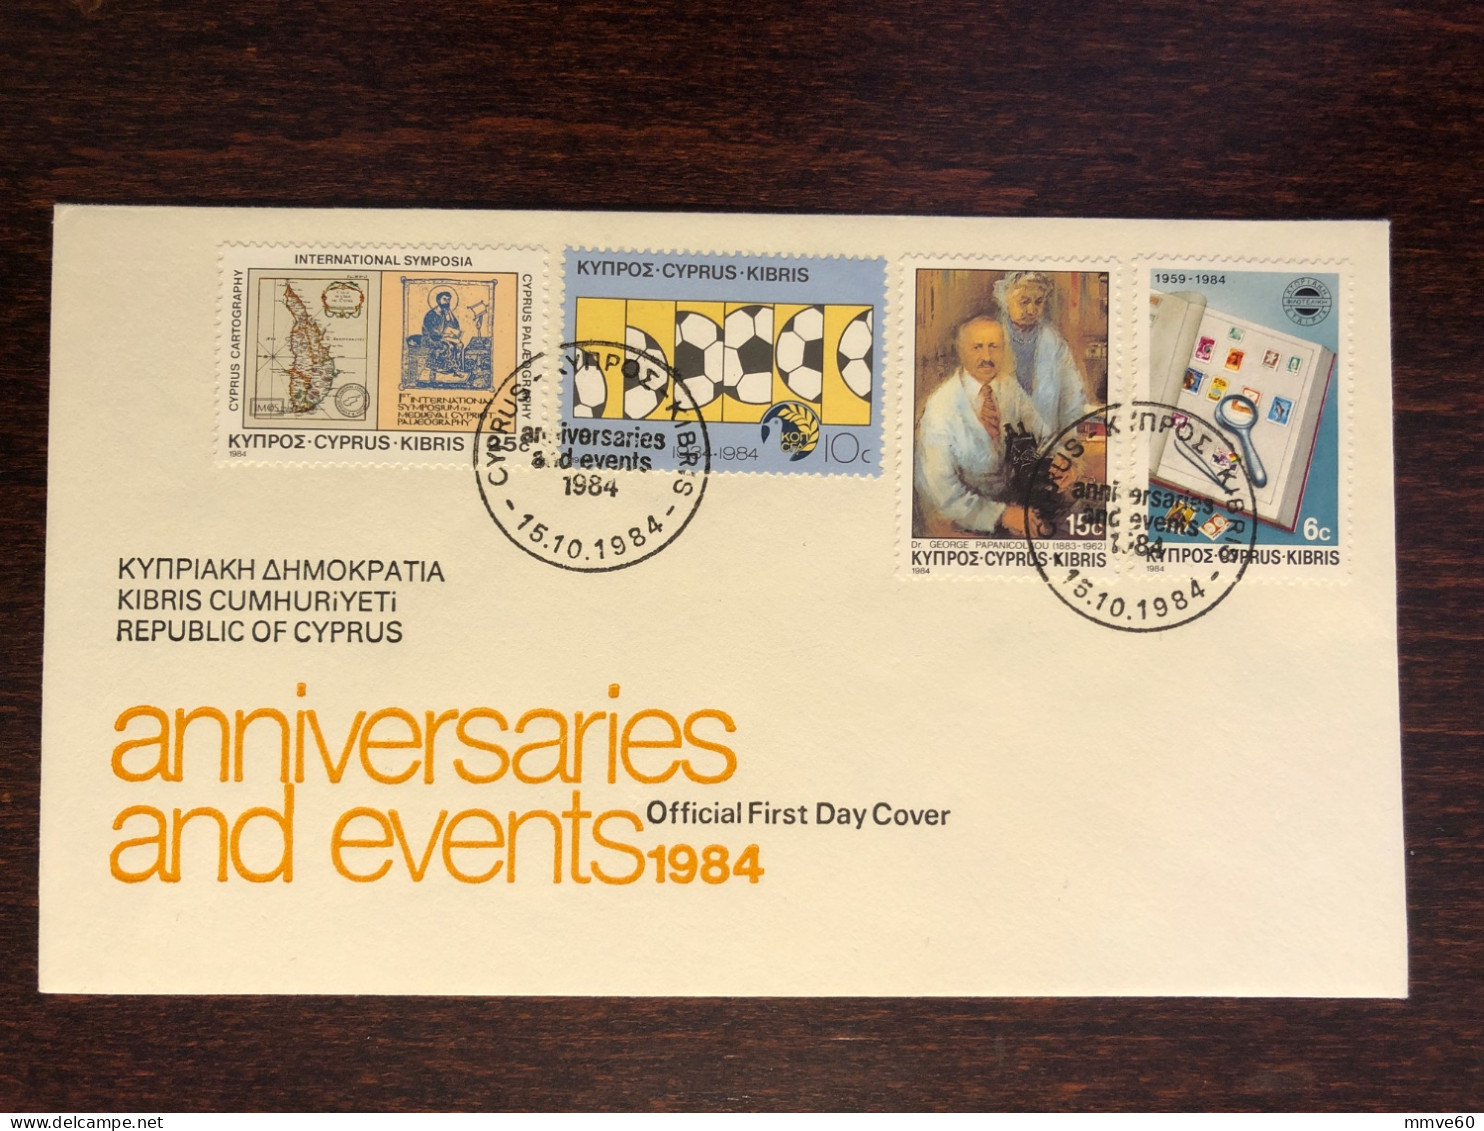 CYPRUS FDC COVER 1984 YEAR PAPANICOLAU ONCOLOGY CANCER HEALTH MEDICINE STAMPS - Covers & Documents